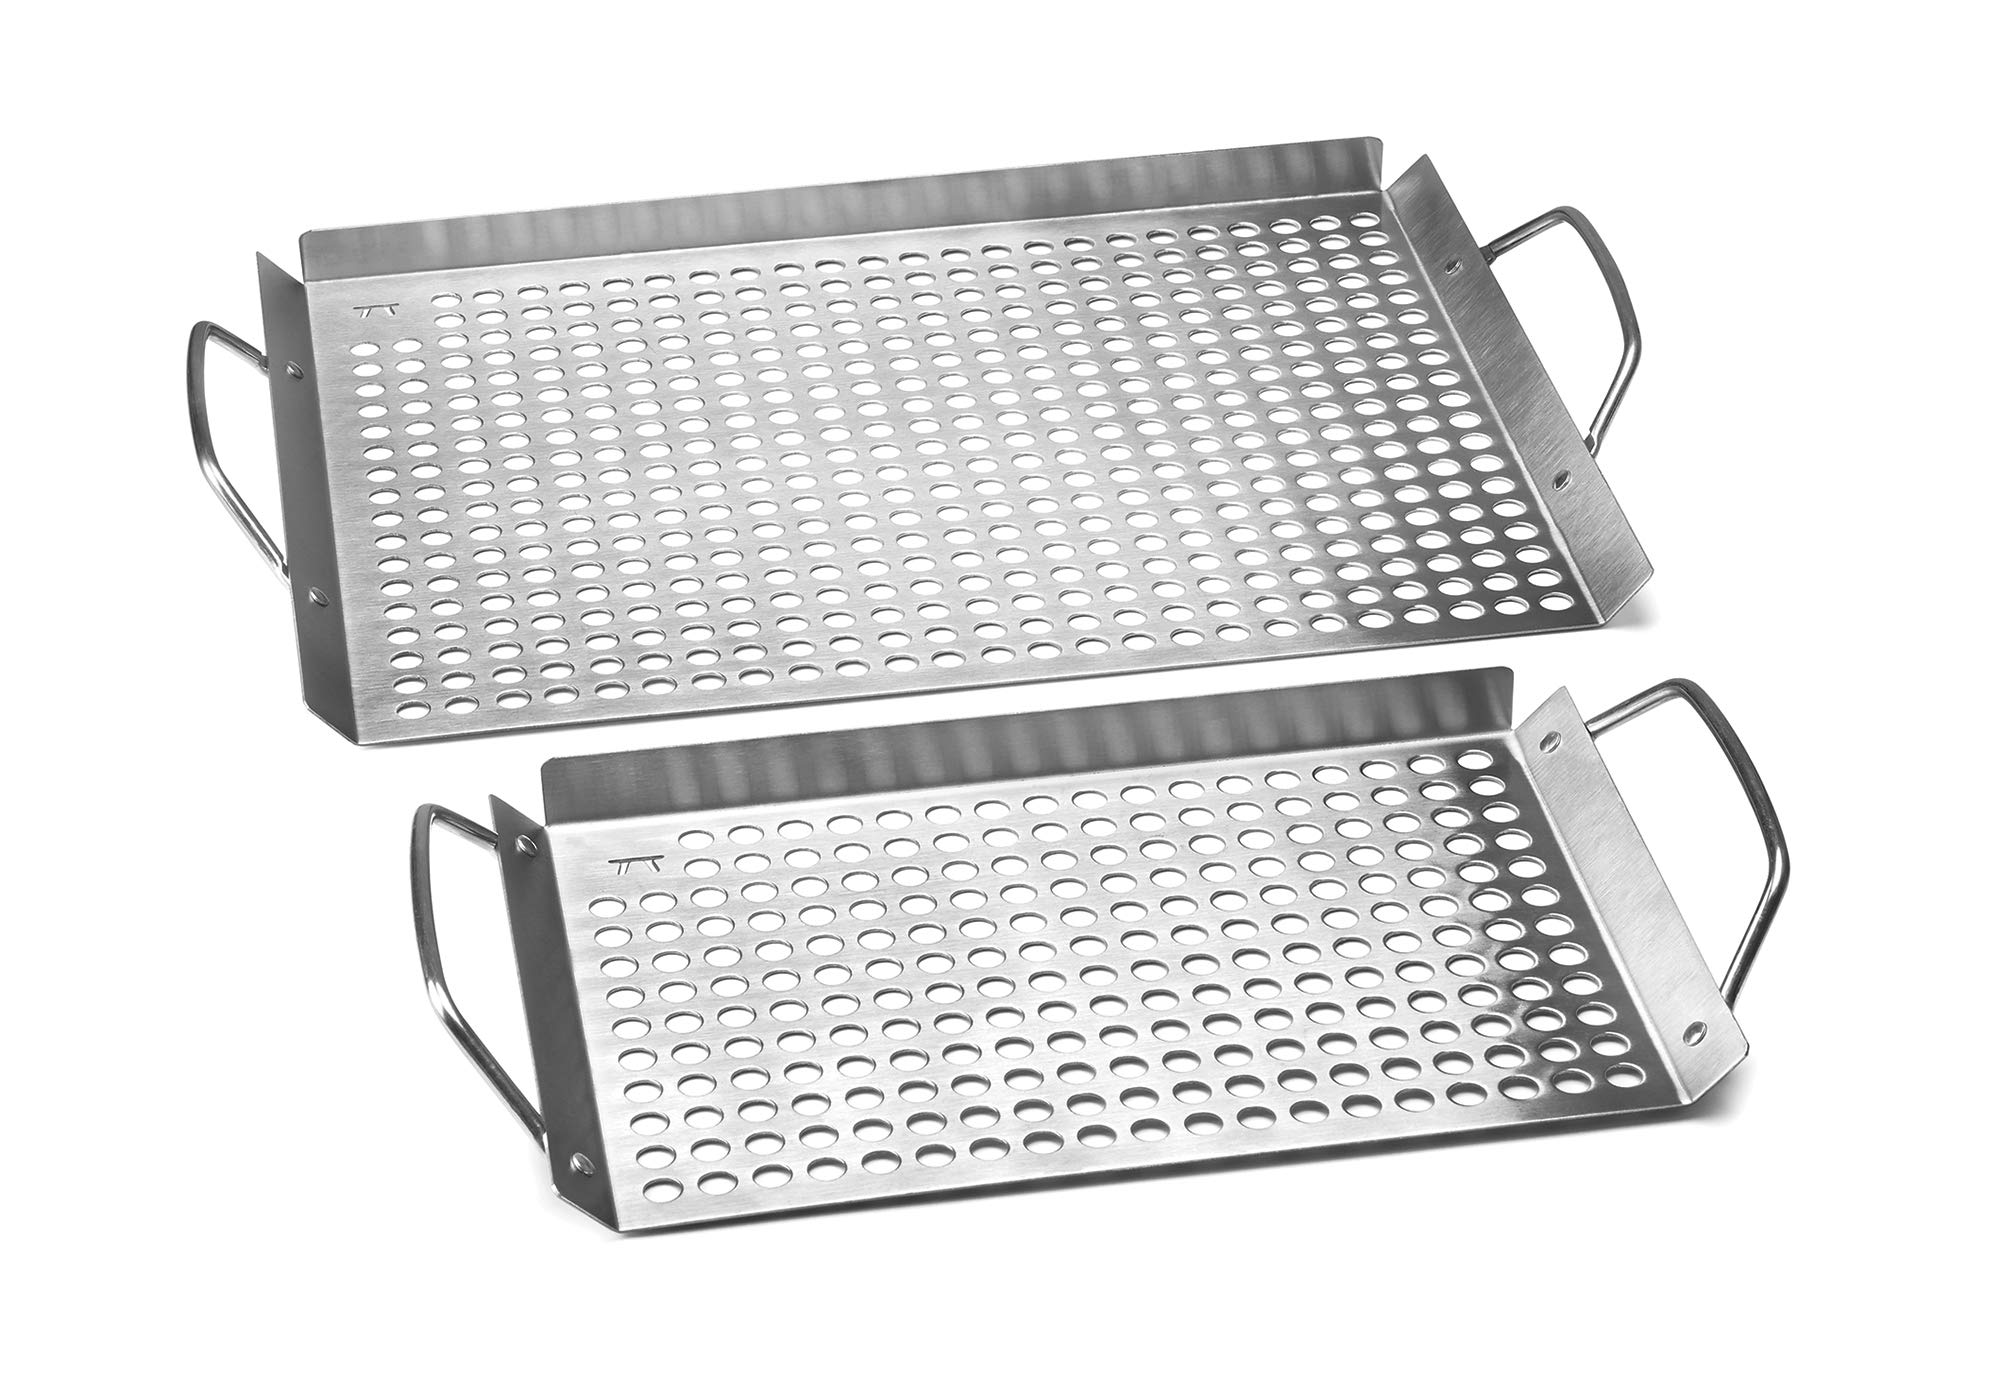 Outset 76630 Stainless Steel Grill Topper Grid, Set of 2, 11"x7" and 11"x17"